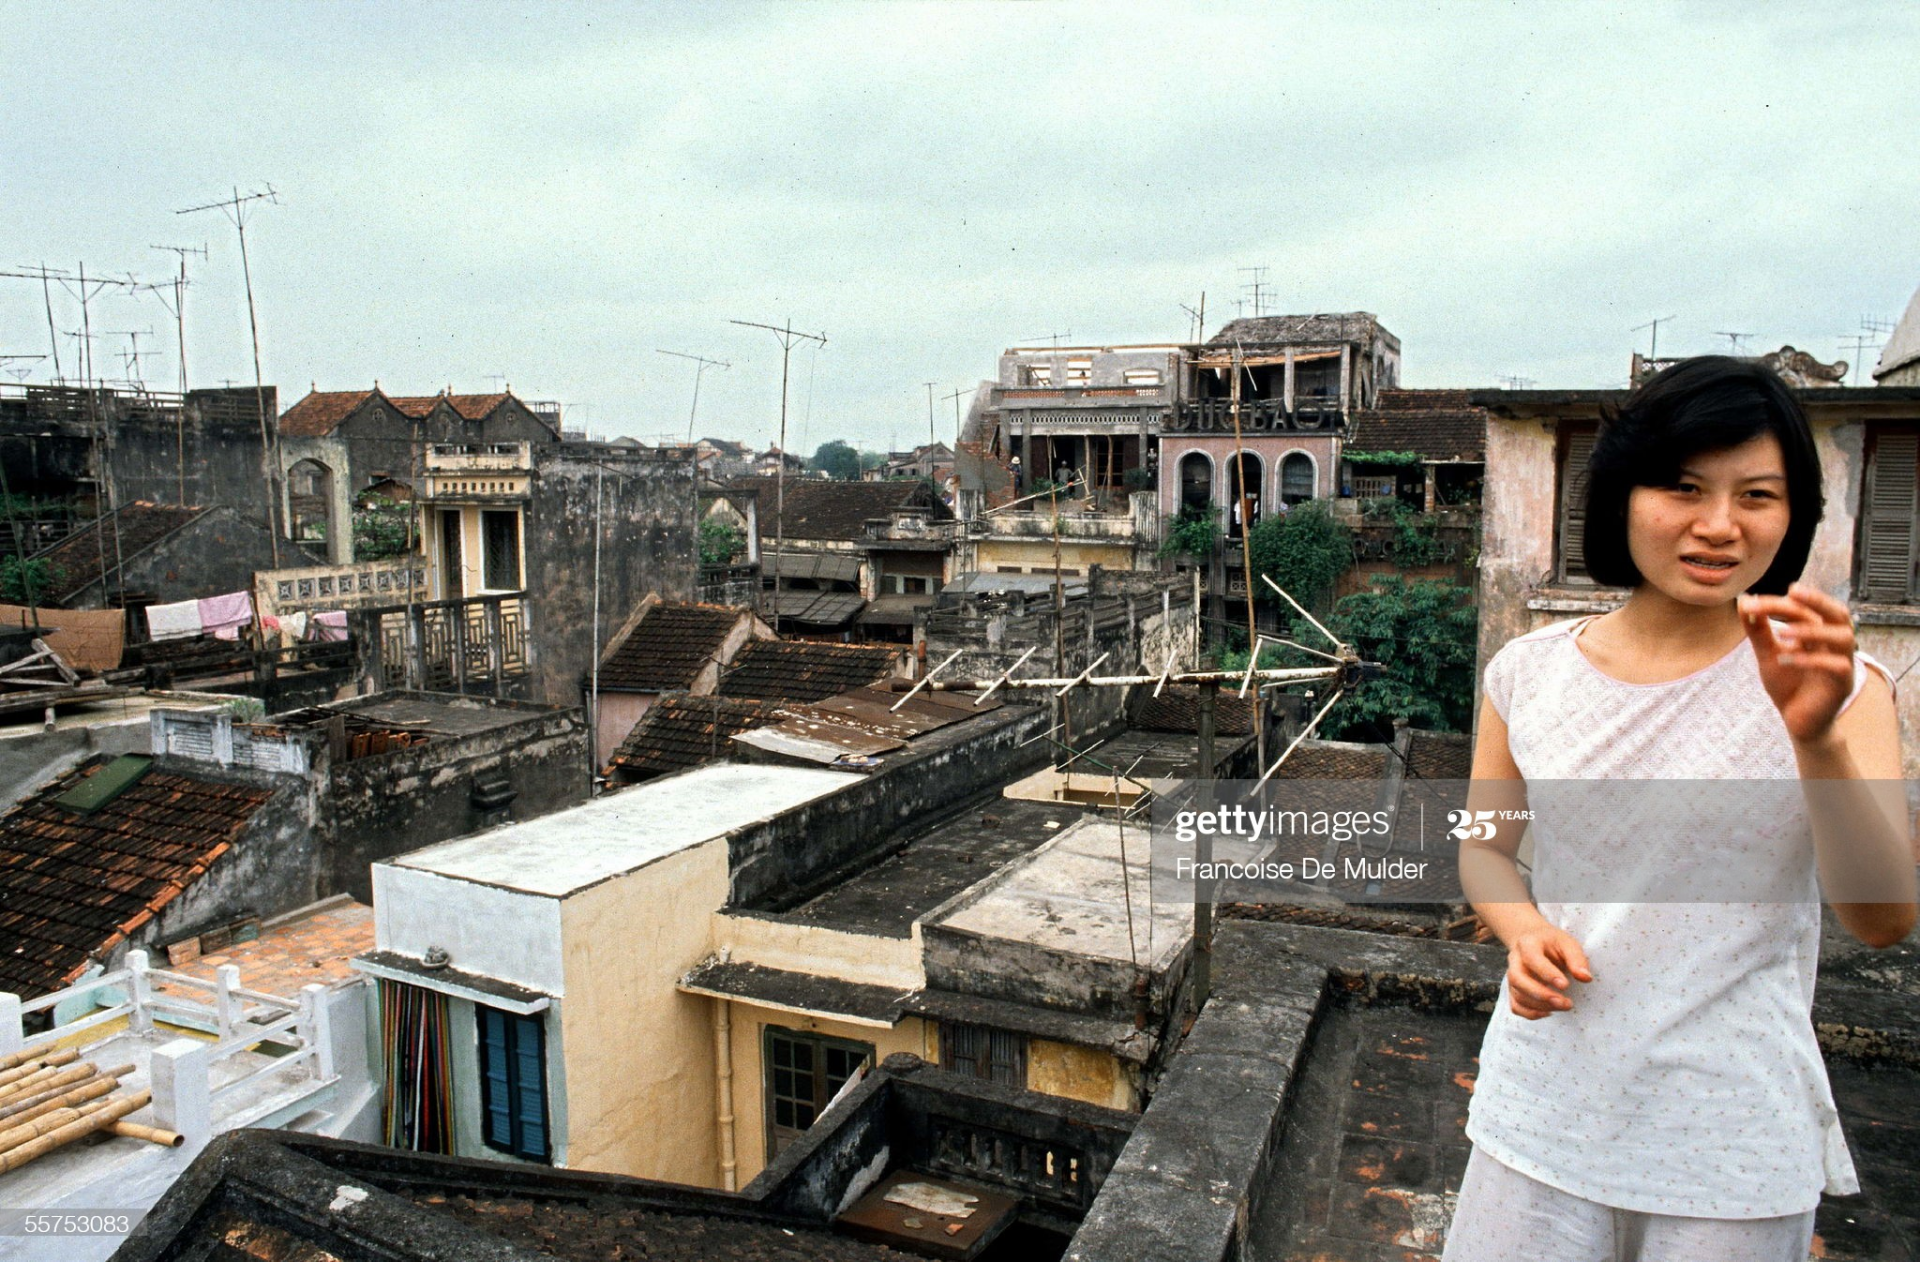 Rustic life of Hanoi in 1989 through French journalist’s lens